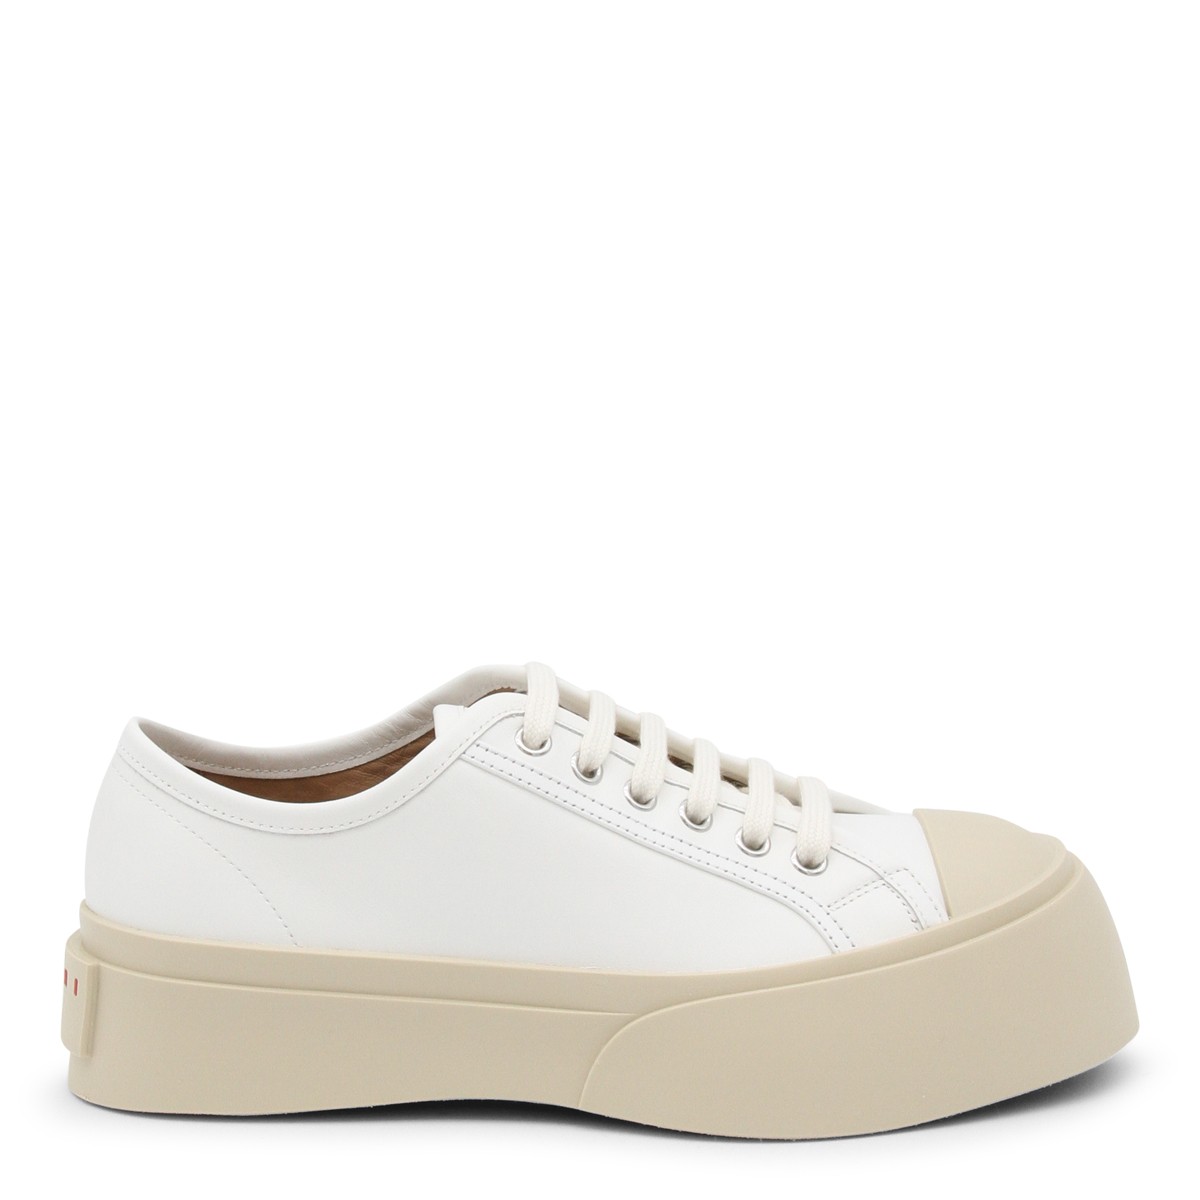 WHITE LEATHER PABLO SNEAKERS